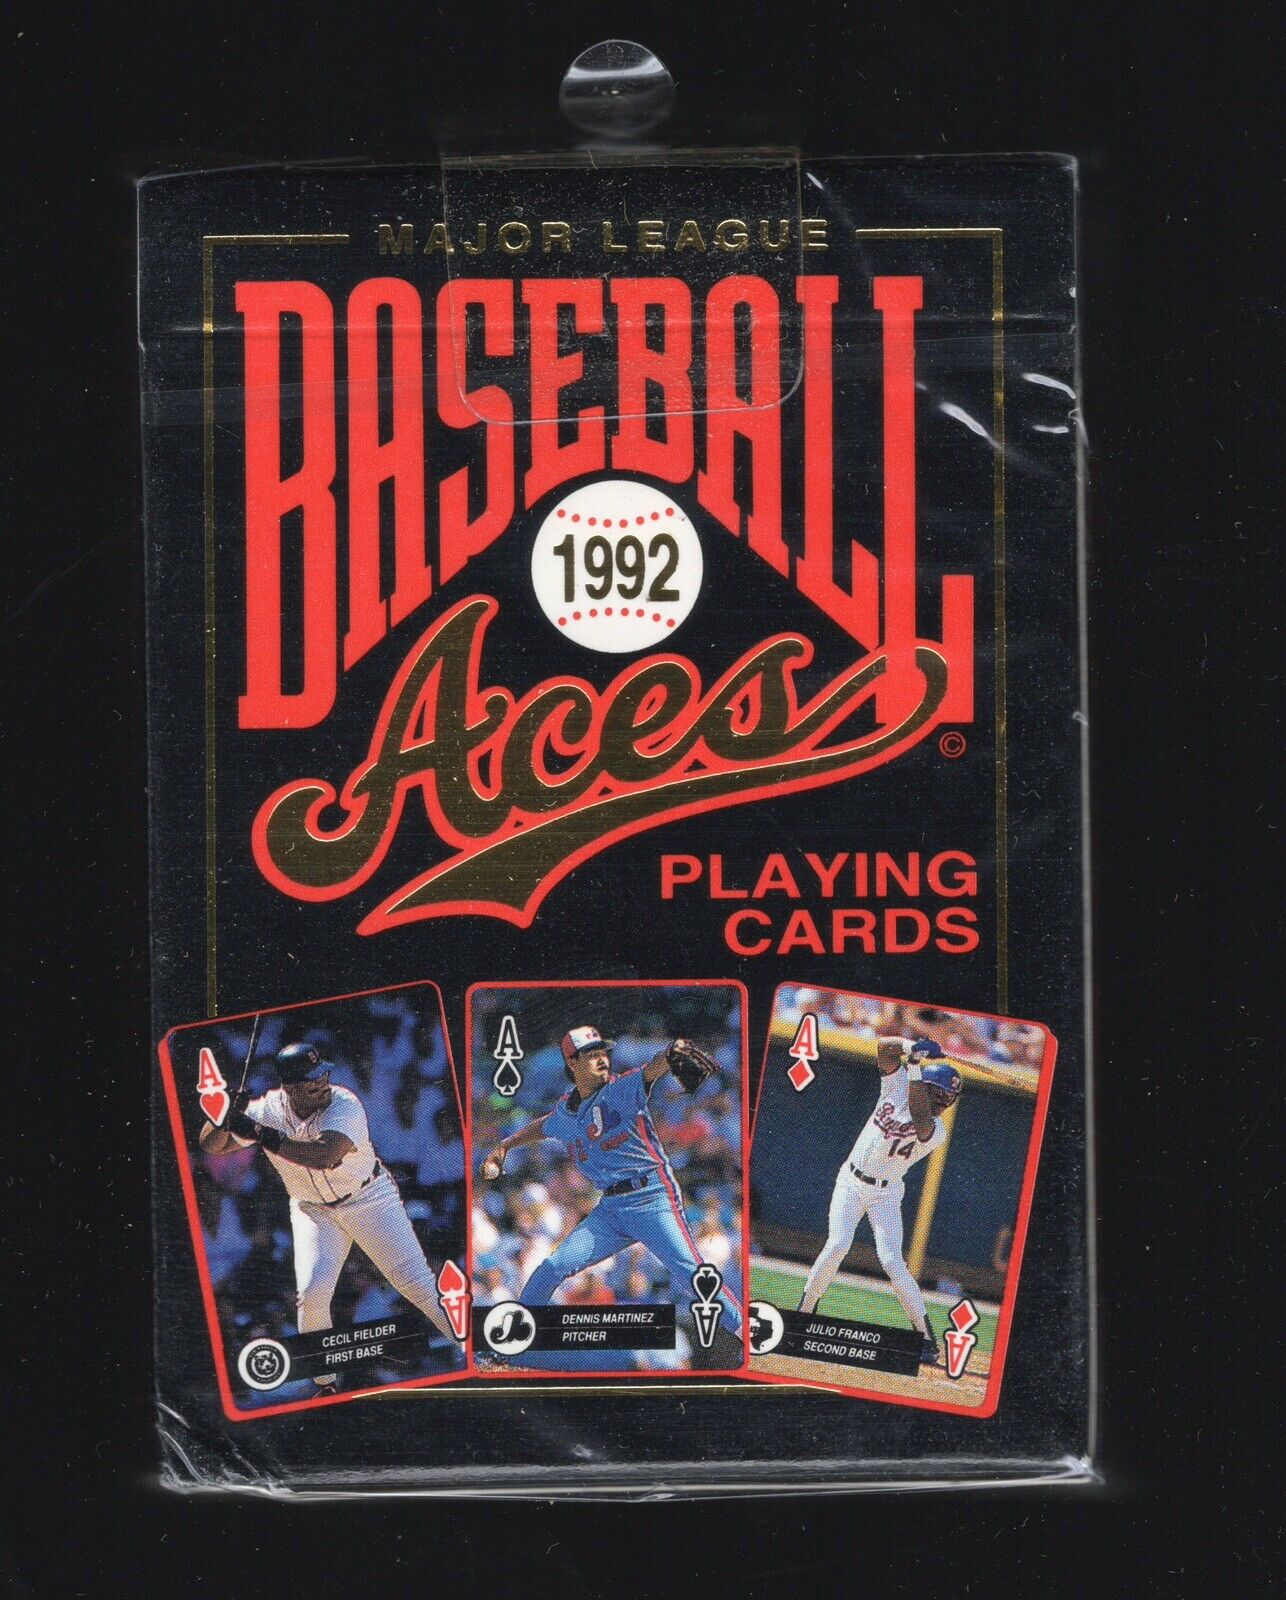 1992 Major League Baseball Aces Playing Cards No. 287 Factory Sealed